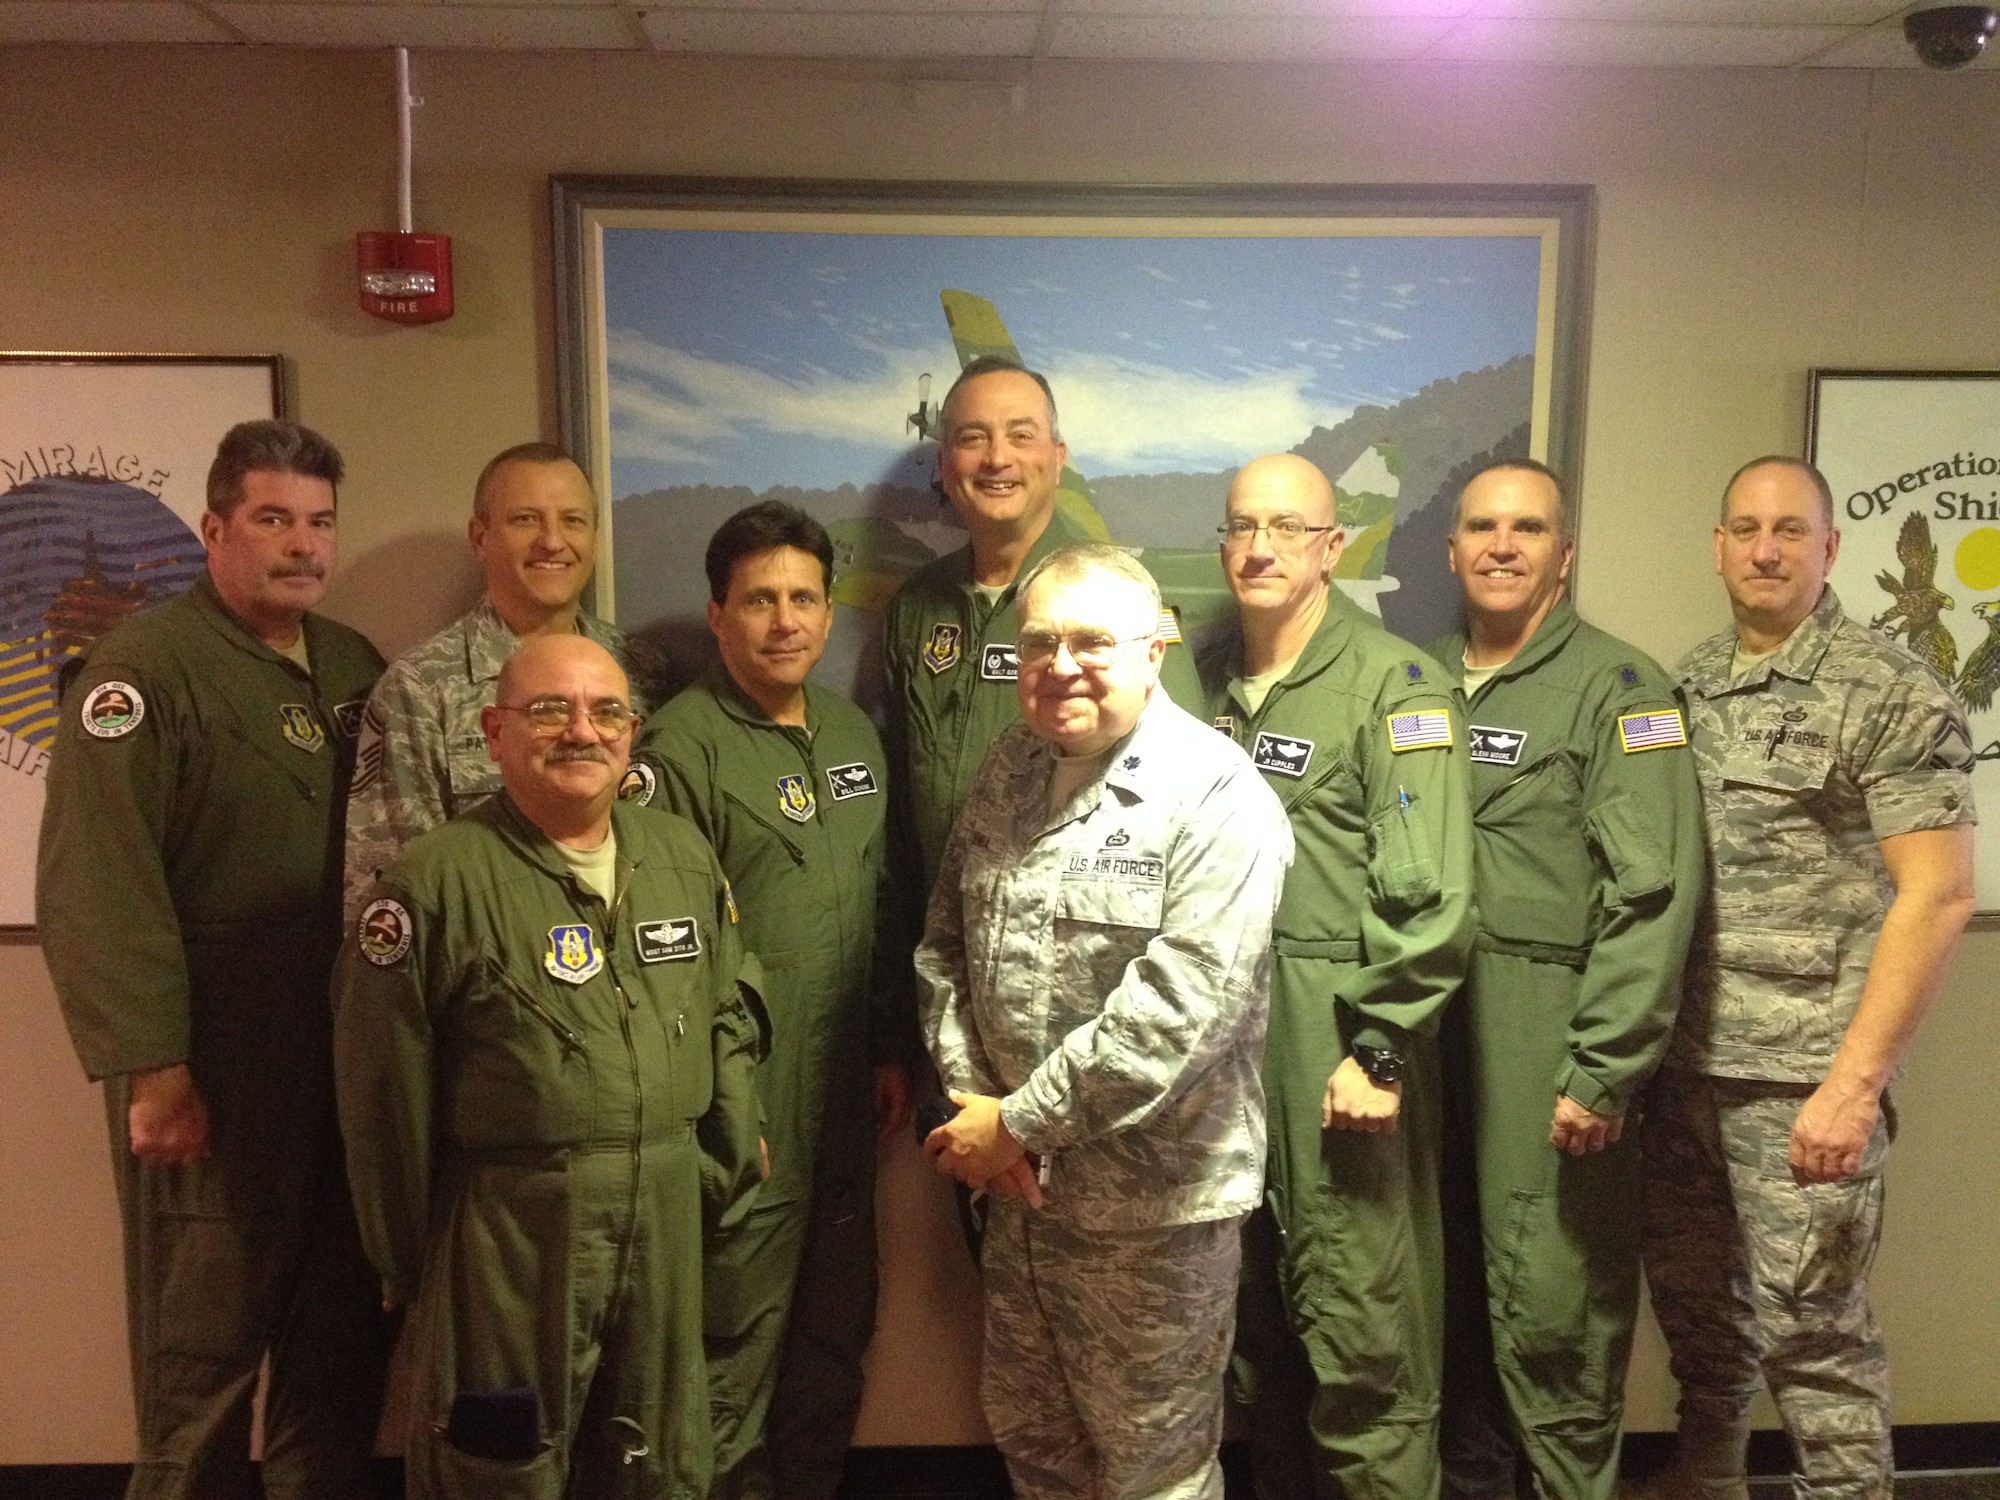 Operations Desert Shield and Desert Storm Veterans of the 328th Airlift Squadron pose for a photo at the Niagara Falls Air Reserve Station, February 28, 2014. The Veterans, including Former 914th Airlift Wing Commander Col. Walter Gordon were part of the October 1990 activation for Operation Desert Storm. (Courtesy Photo)